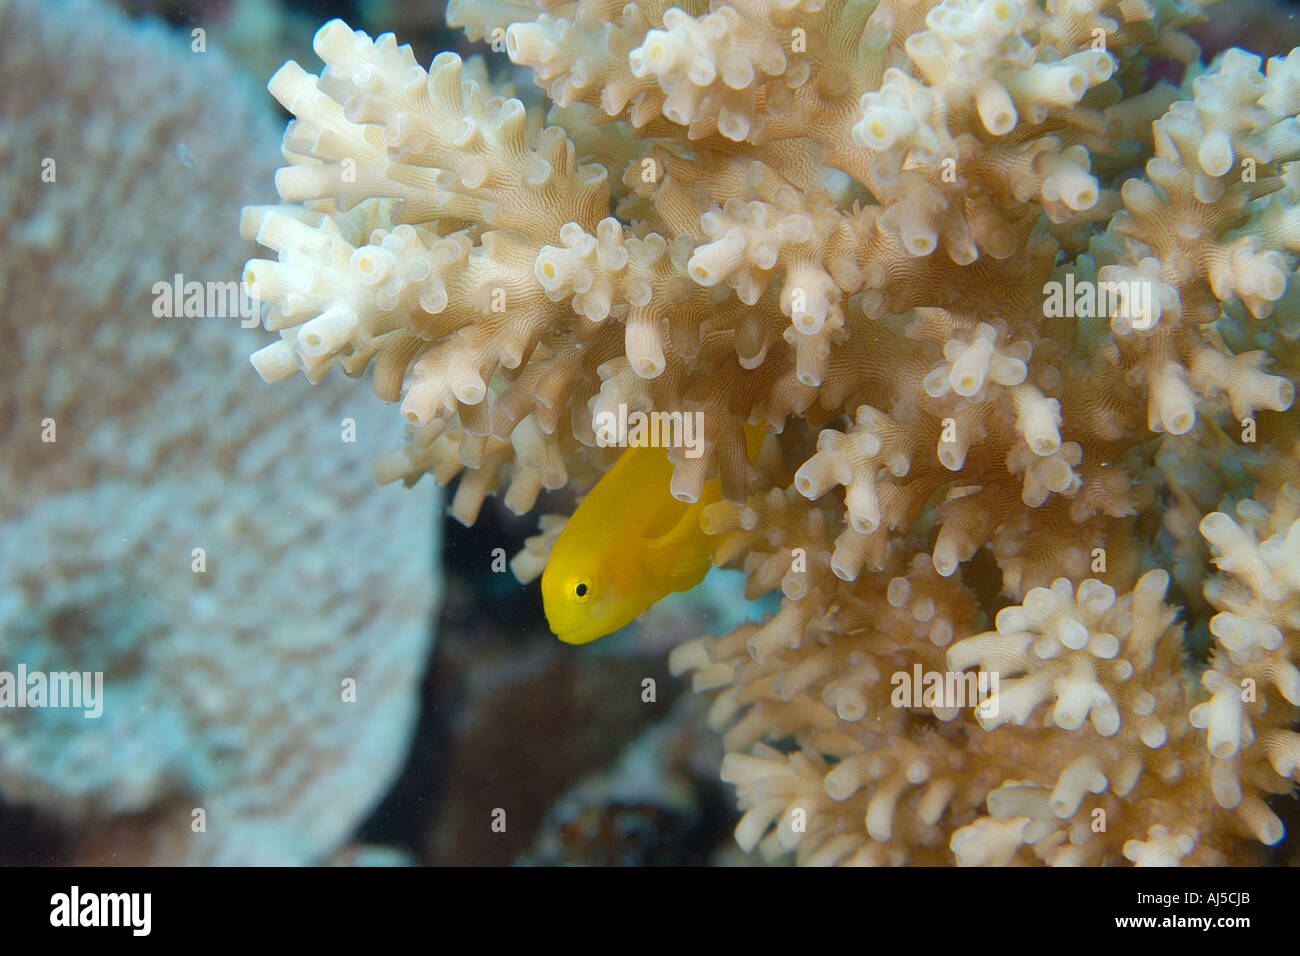 Yellow coral goby Gobiodon okinawae perched on coral branch Galaxea sp Ailuk atoll Marshall Islands Pacific Stock Photo